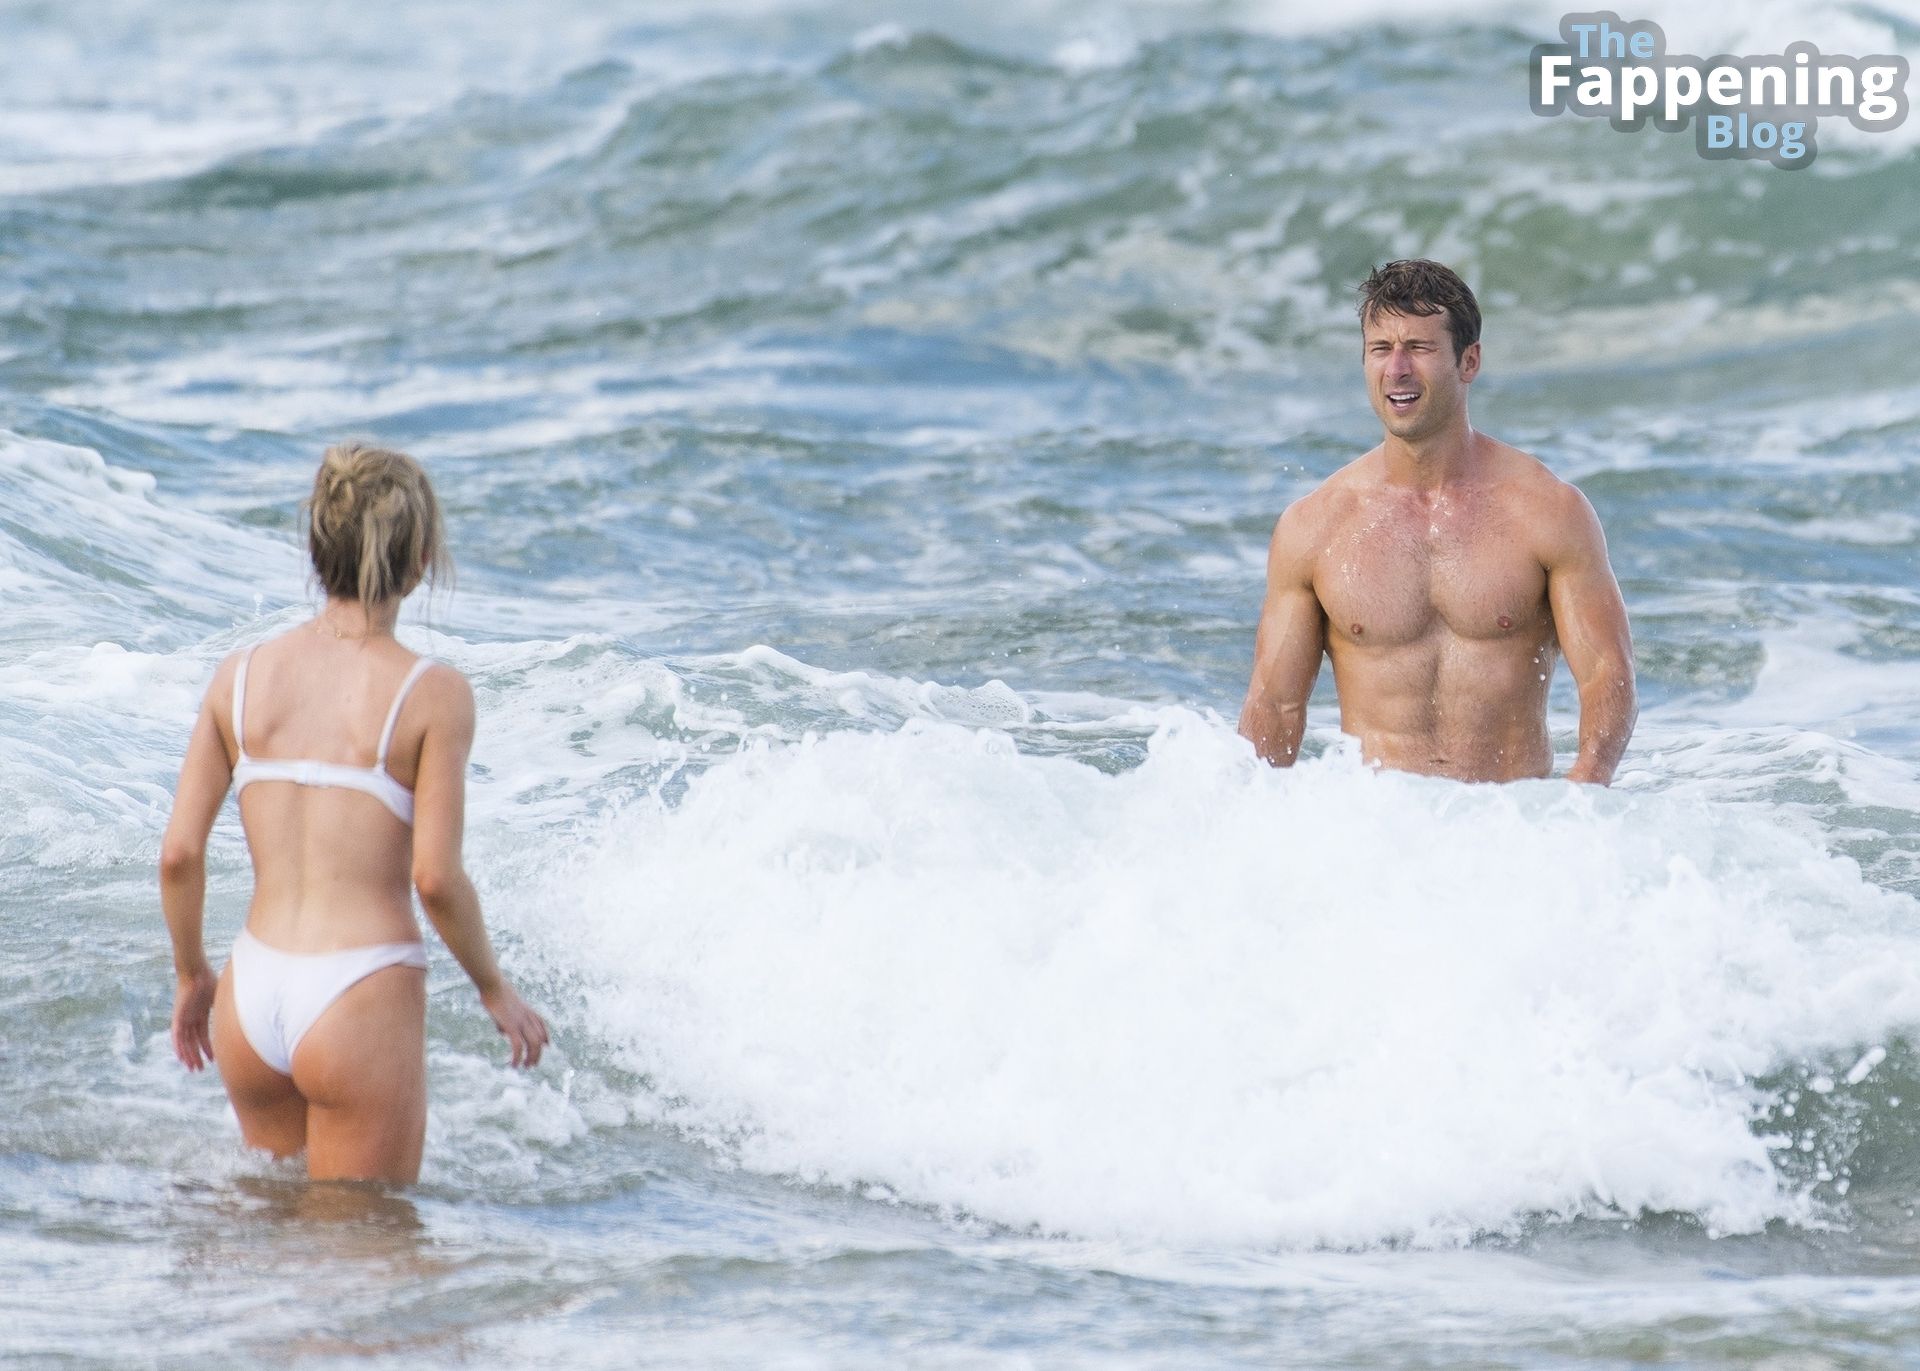 Sydney Sweeney &amp; Glen Powell Show of Their Beach Bodies While Filming in Australia (92 Photos)